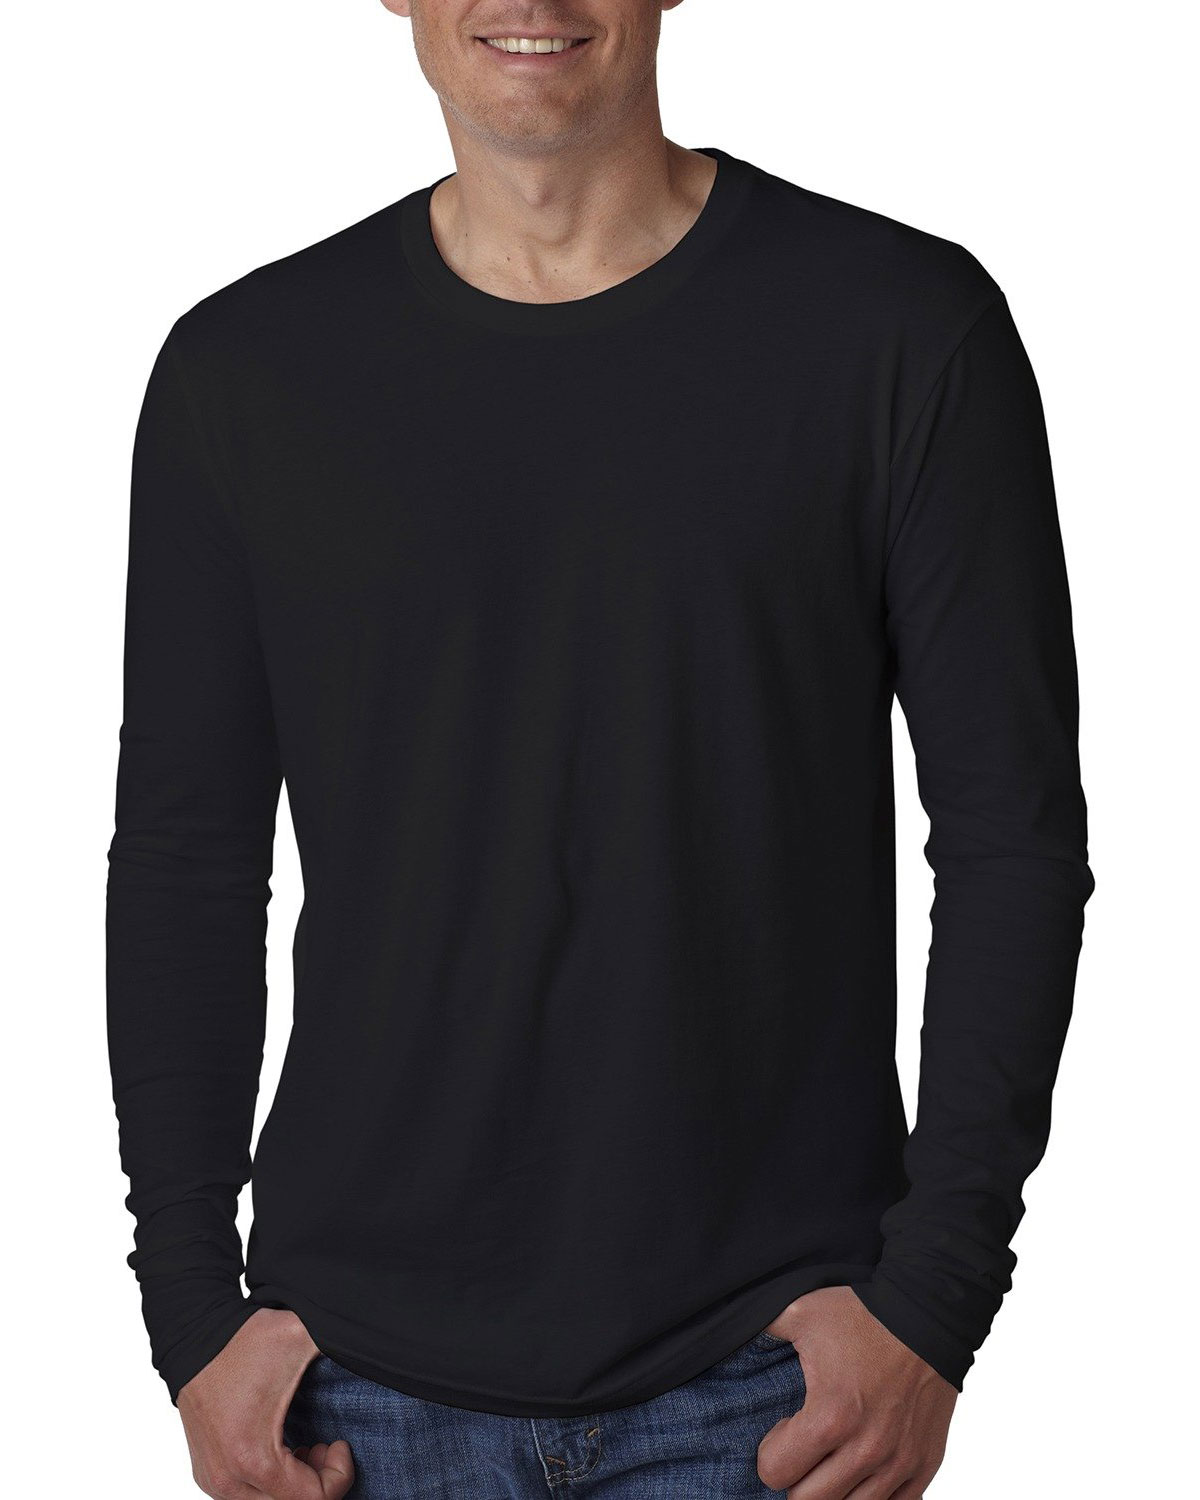 Next Level N3601 Men Premium Fitted Long-Sleeve Crew Tee at Apparelstation